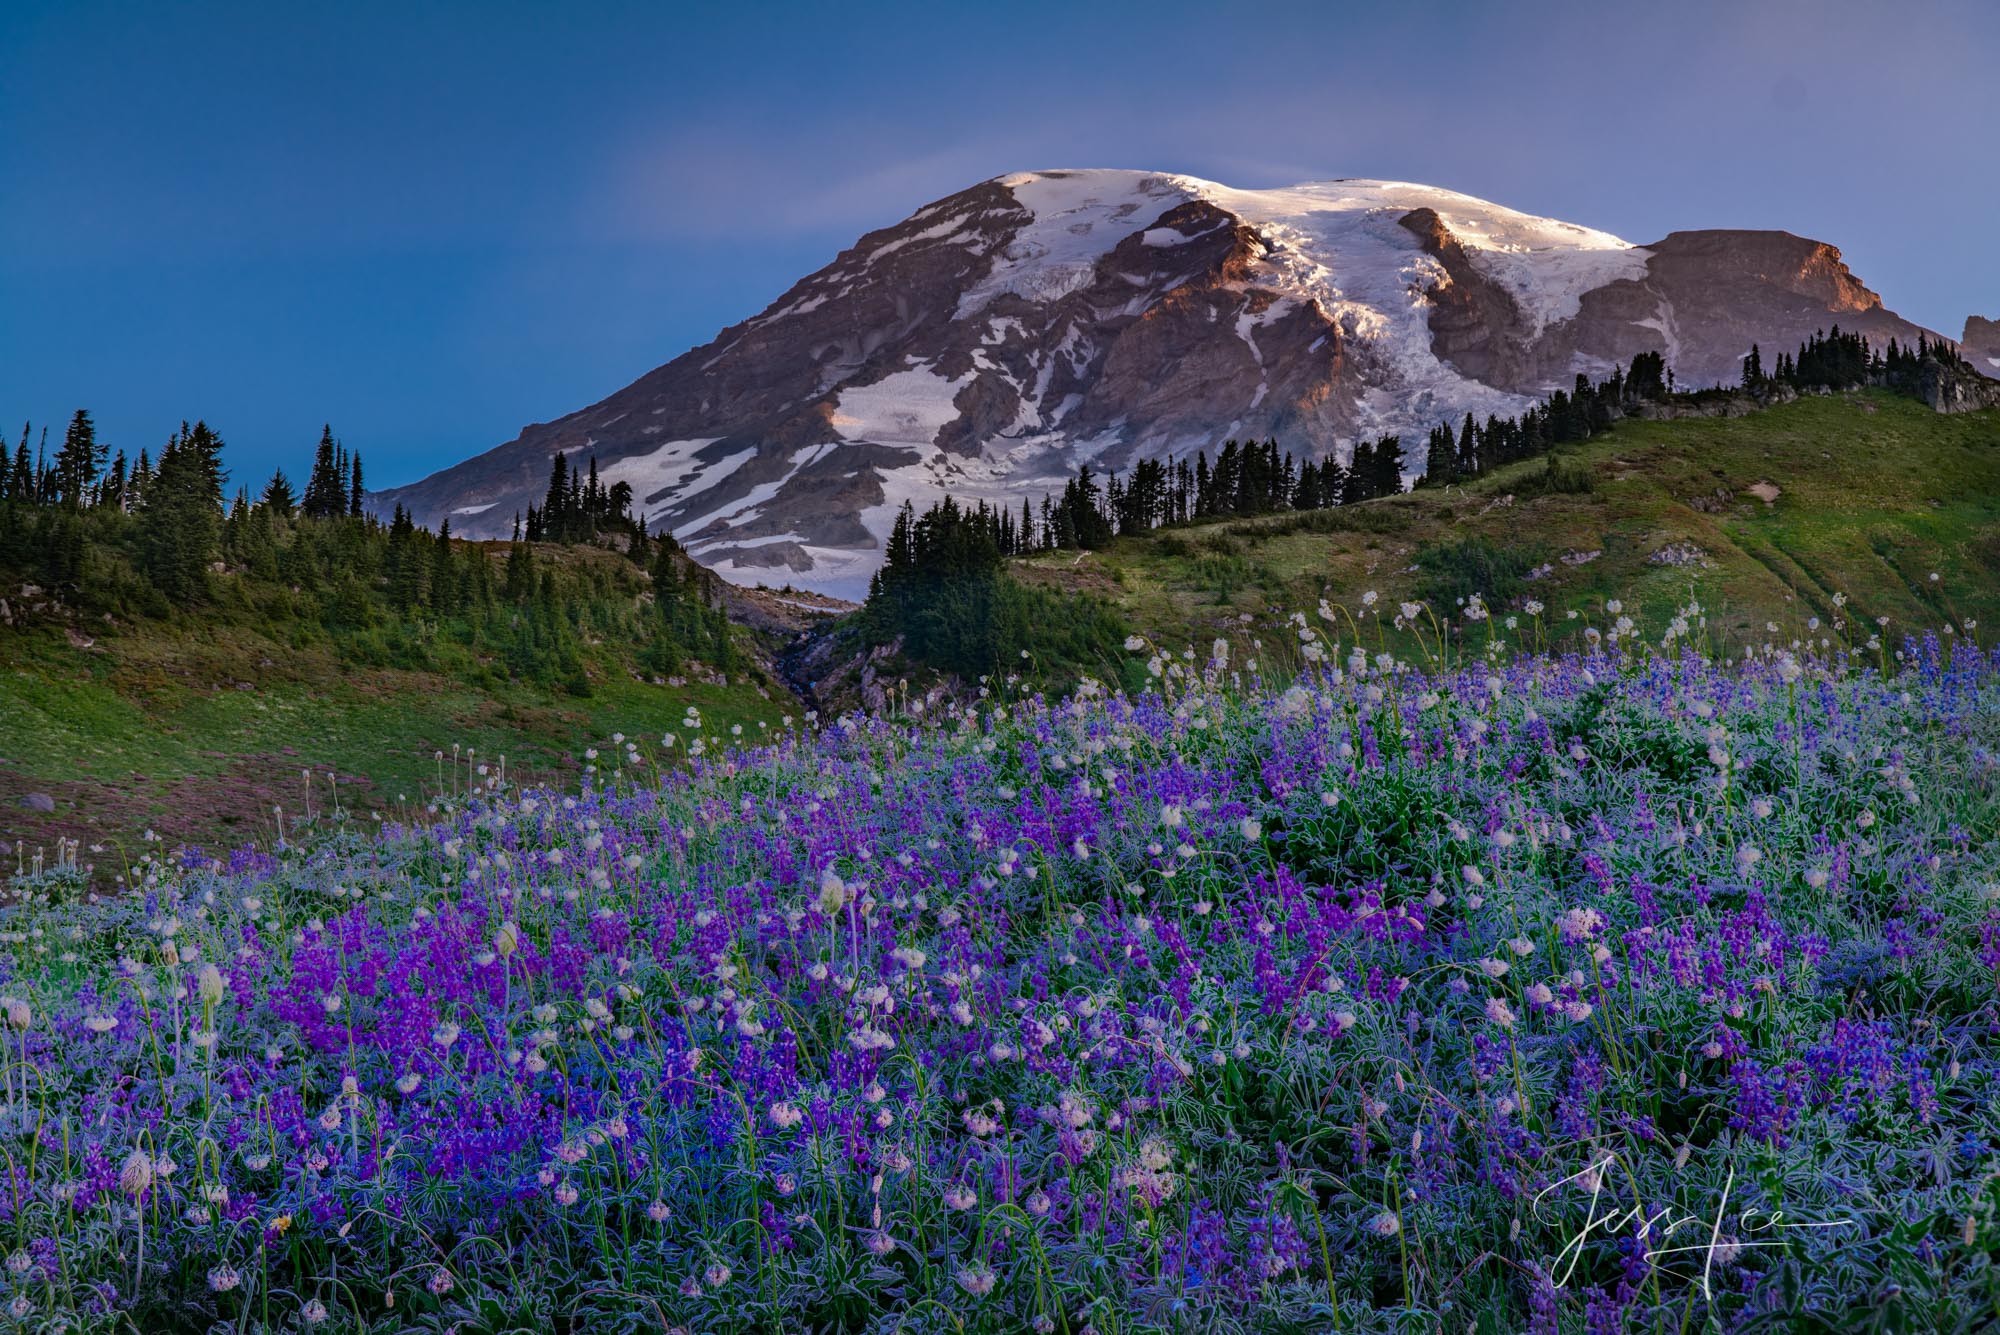 Beautify  your space  with Jess Lee's limited edition photography print, Lupine Land, from his Mount Rainier Gallery . Order...